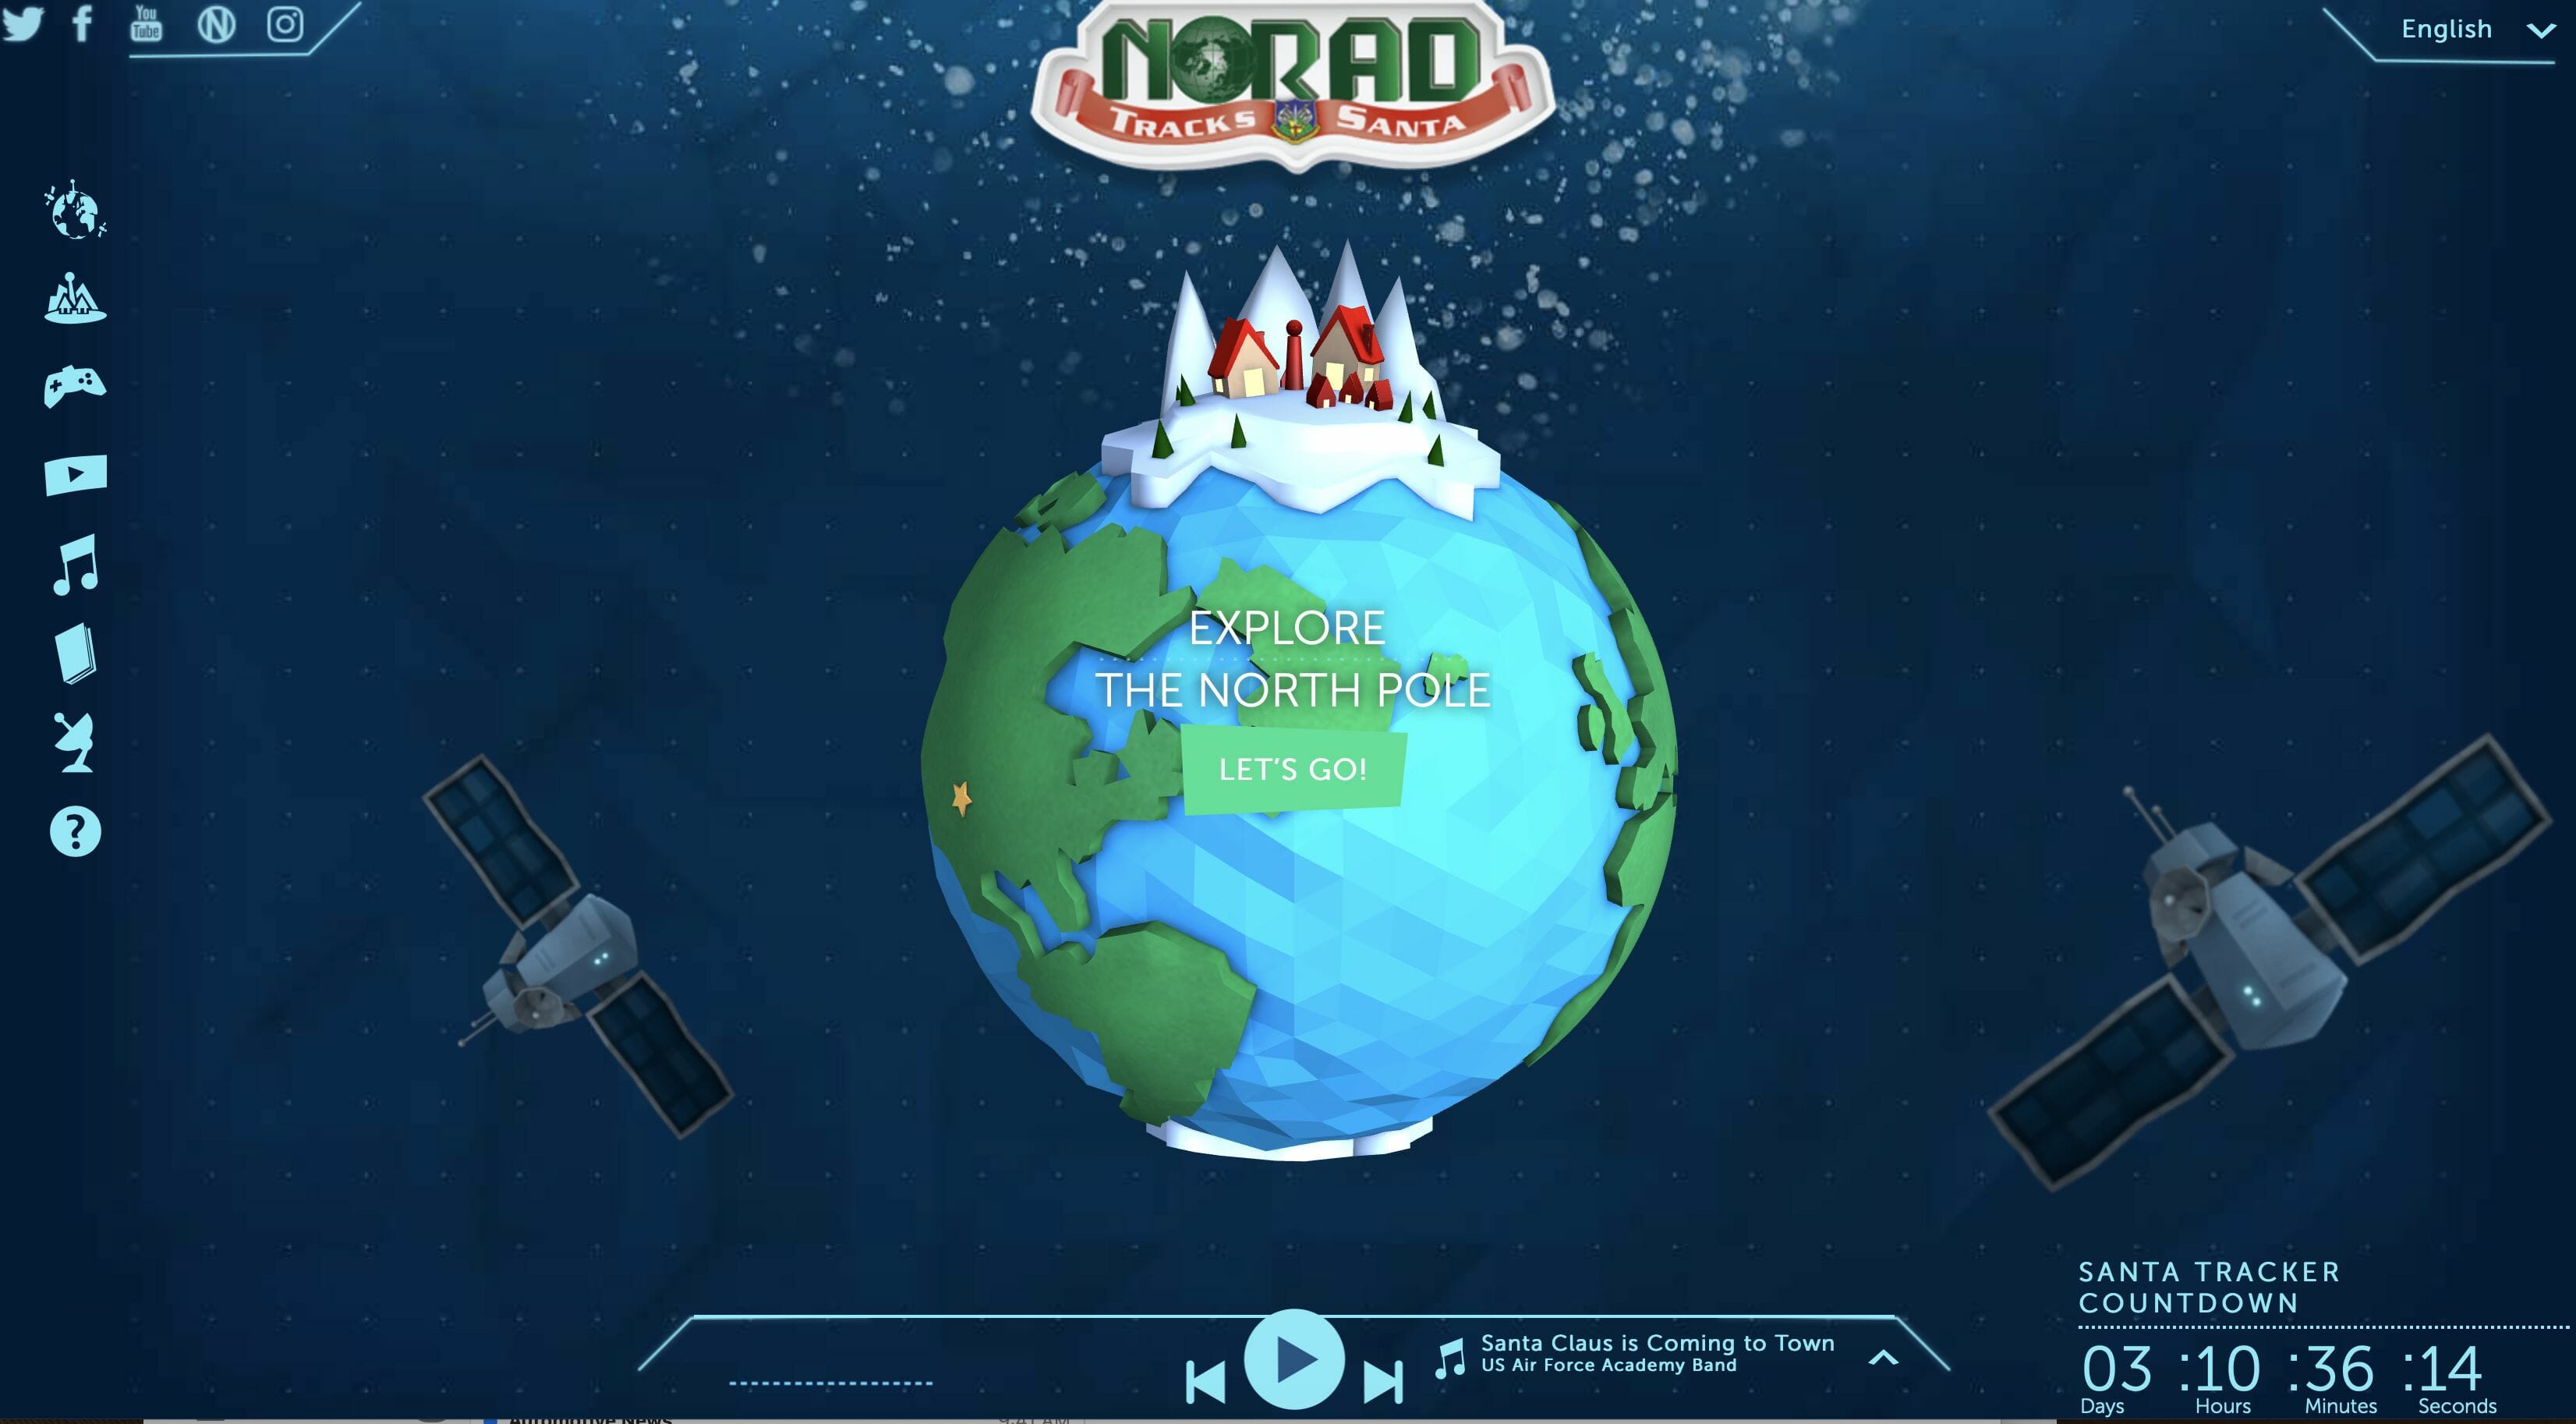 NORAD Tracks Santa App Mobile and Tablet Apps Online Directory